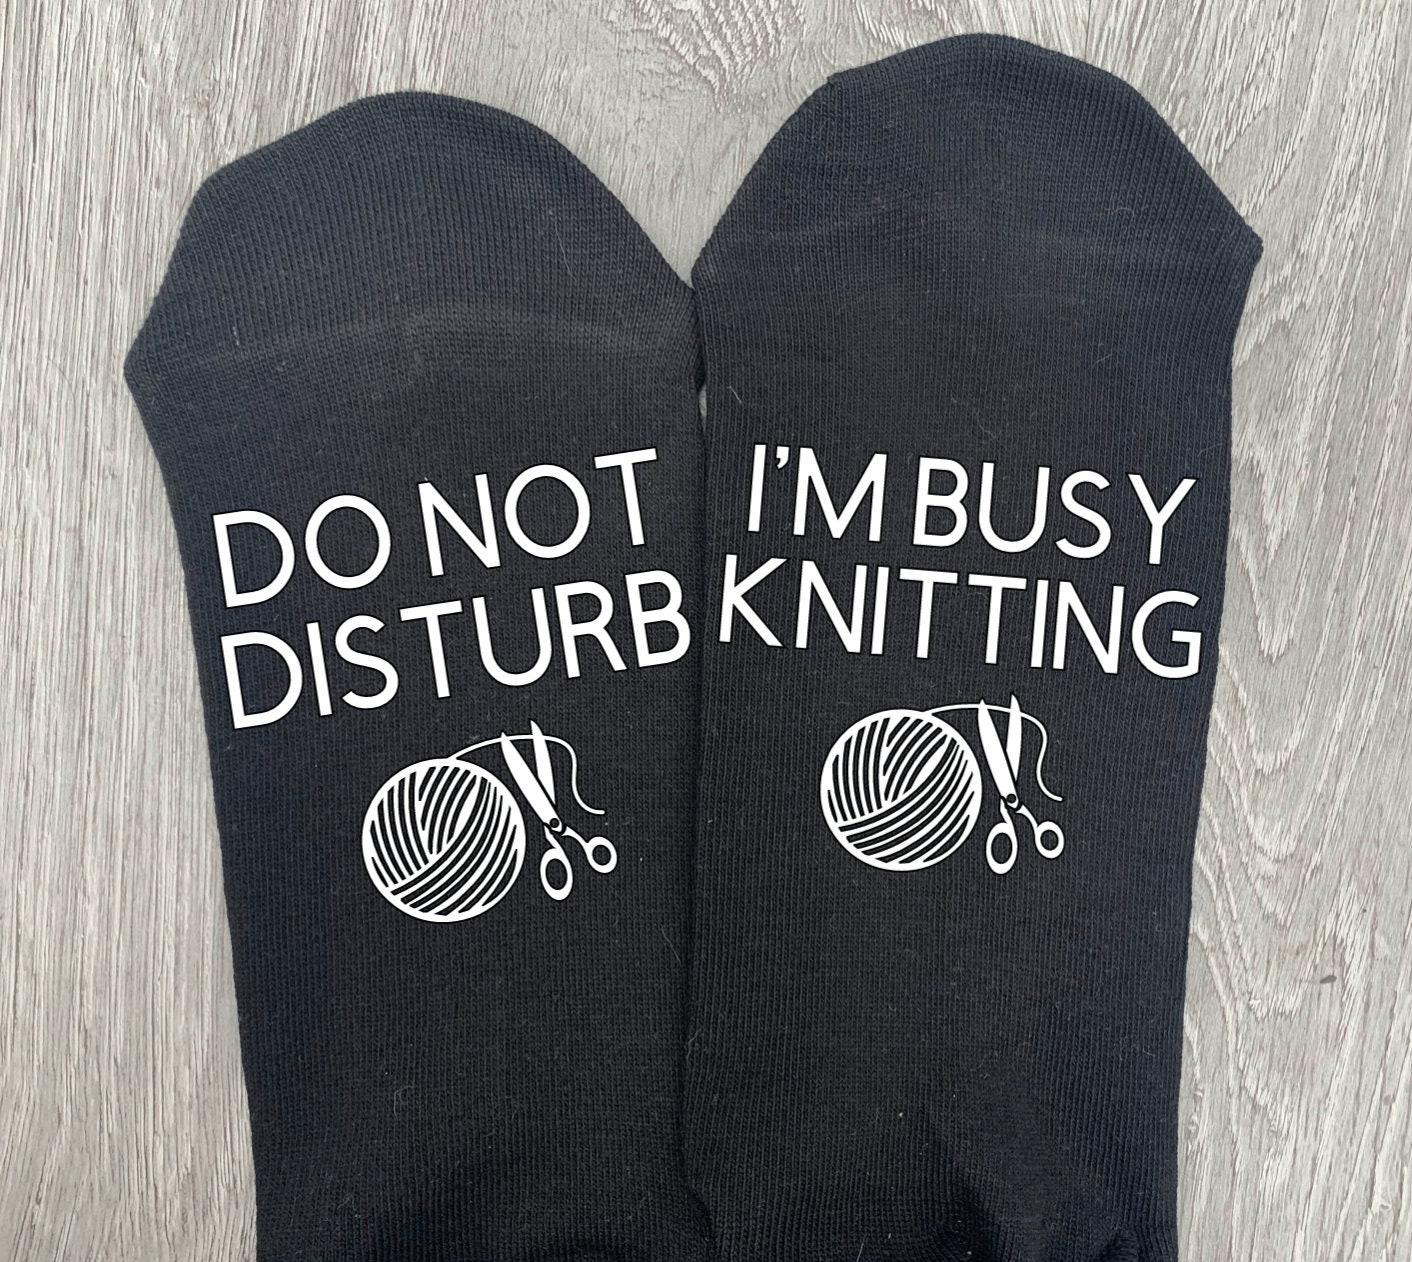 Funny Socks for Curling Up While Knitting